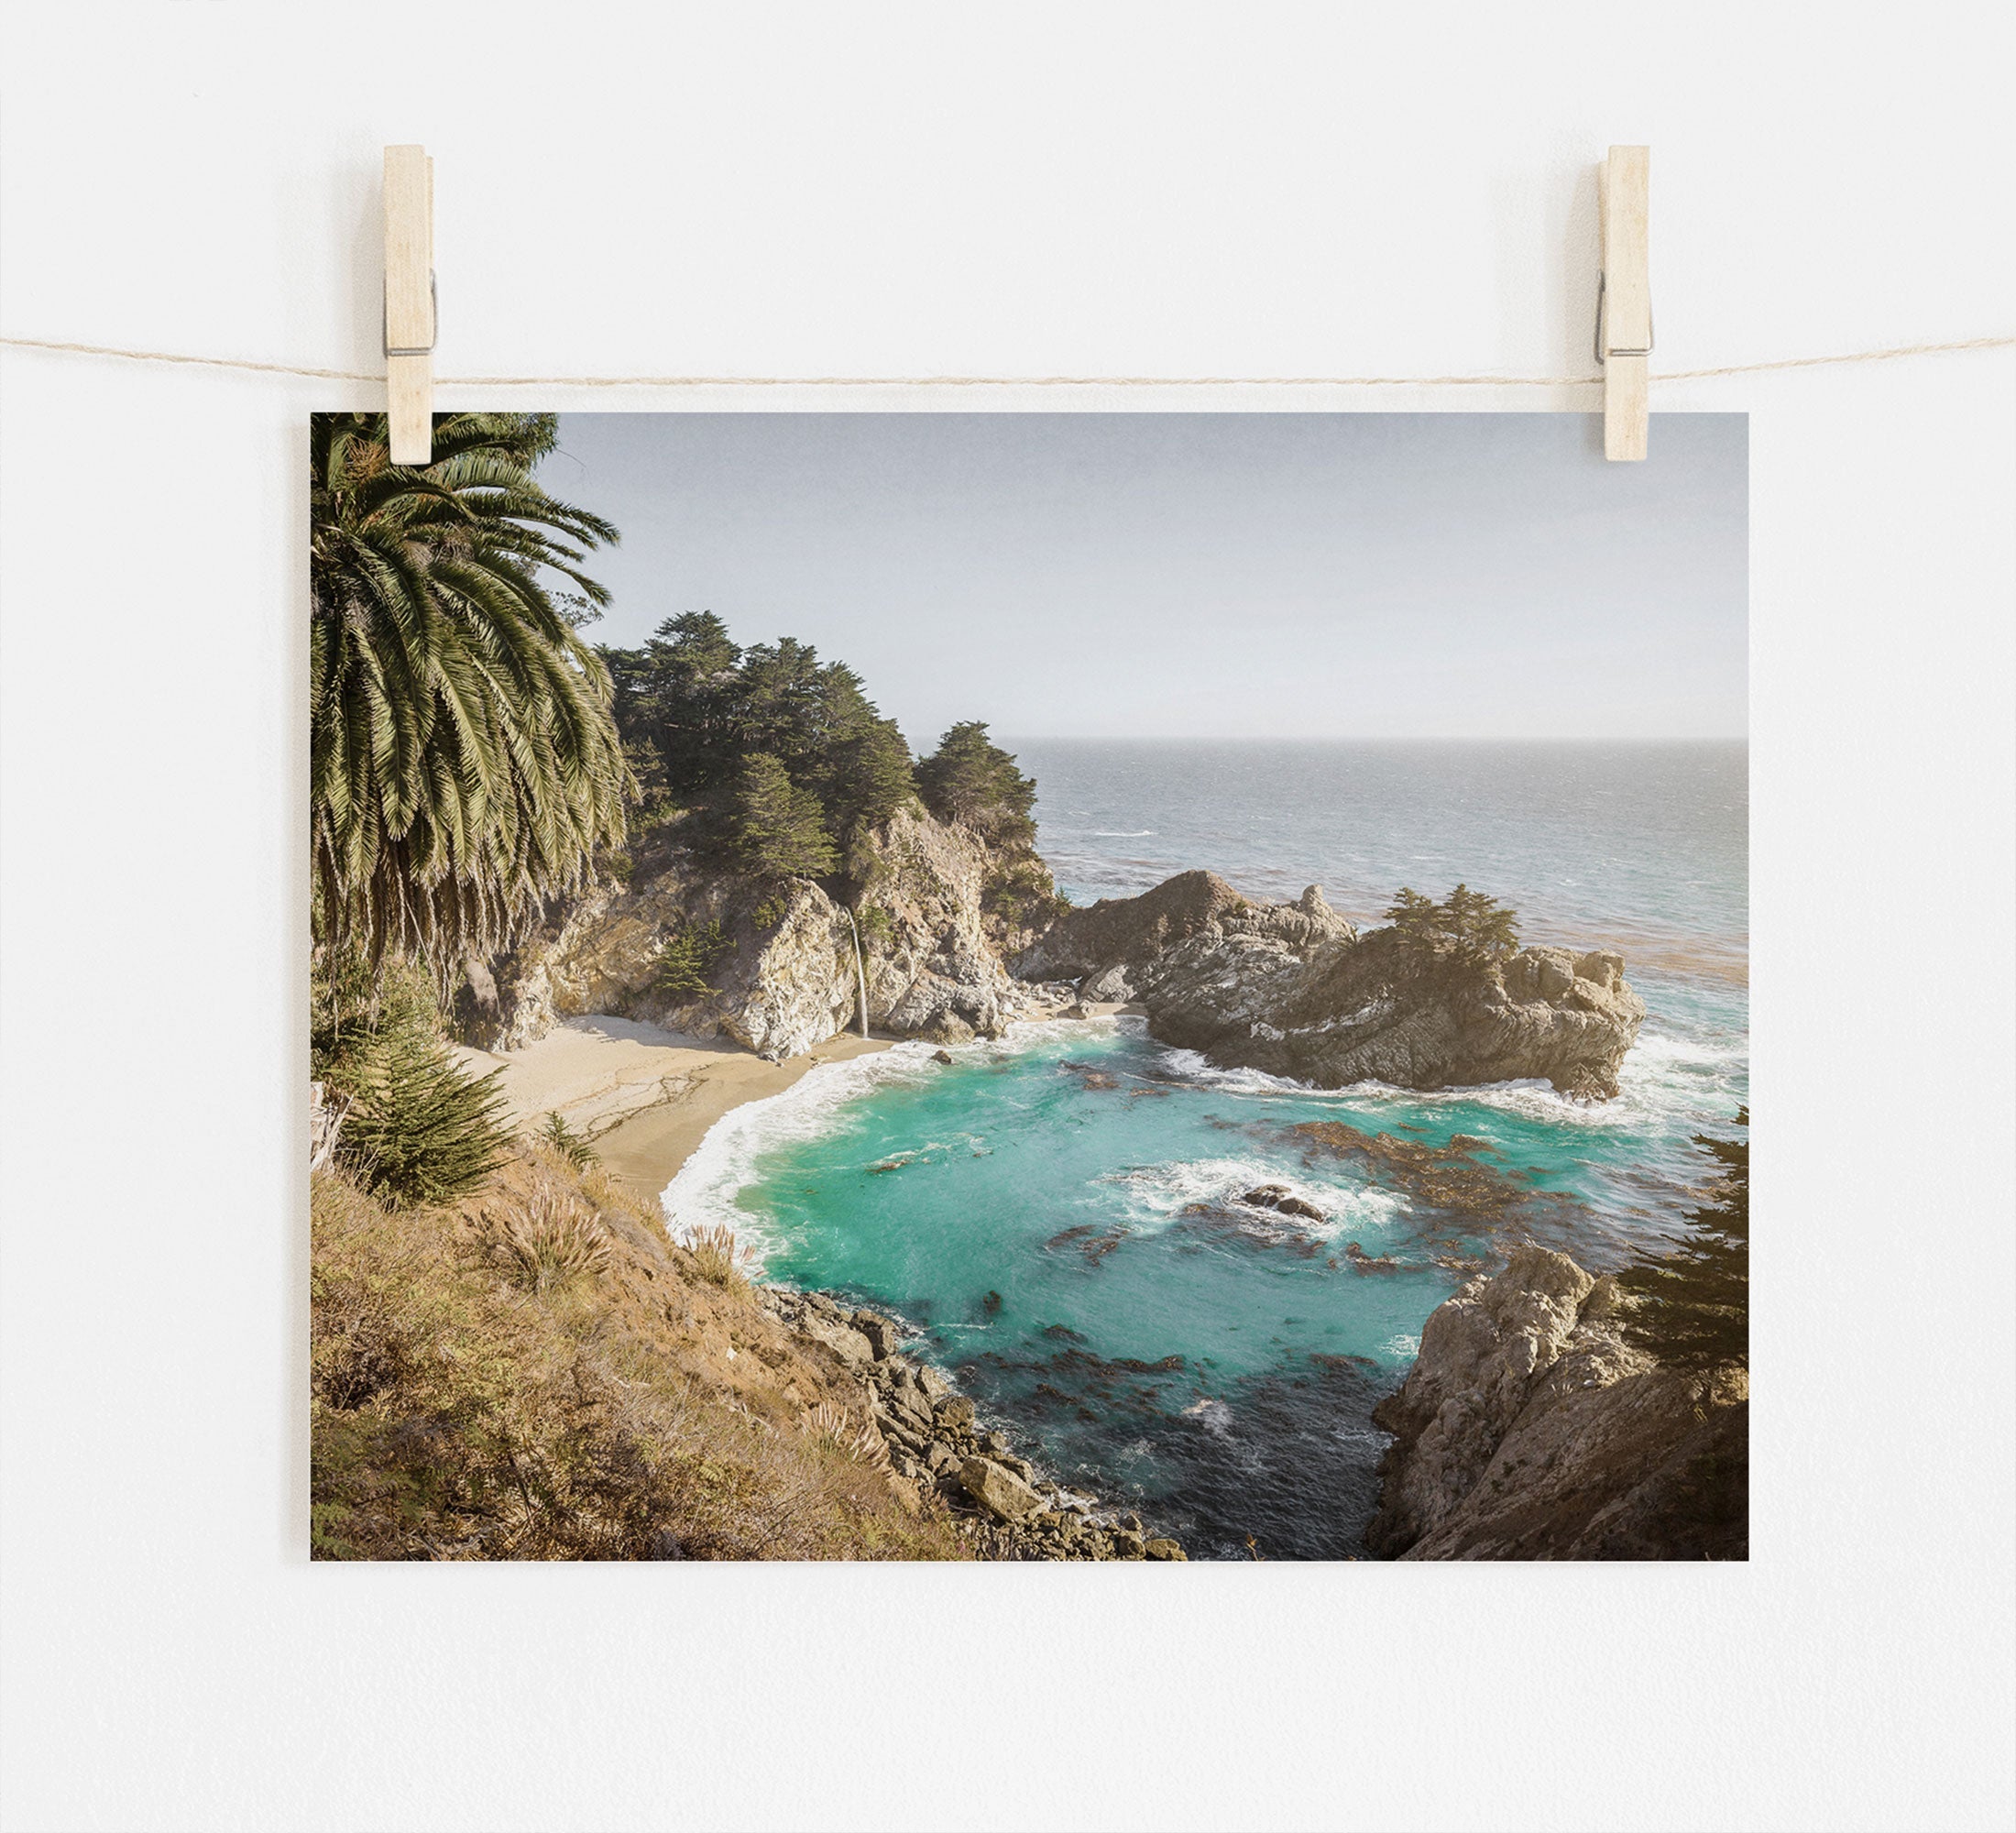 Photo of a scenic Offley Green Big Sur Coastal Print, &#39;Julia Pffeifer&#39; with turquoise waters, suspended by clothespins. The view includes rocky cliffs, a sandy beach, and lush greenery under a bright sky.